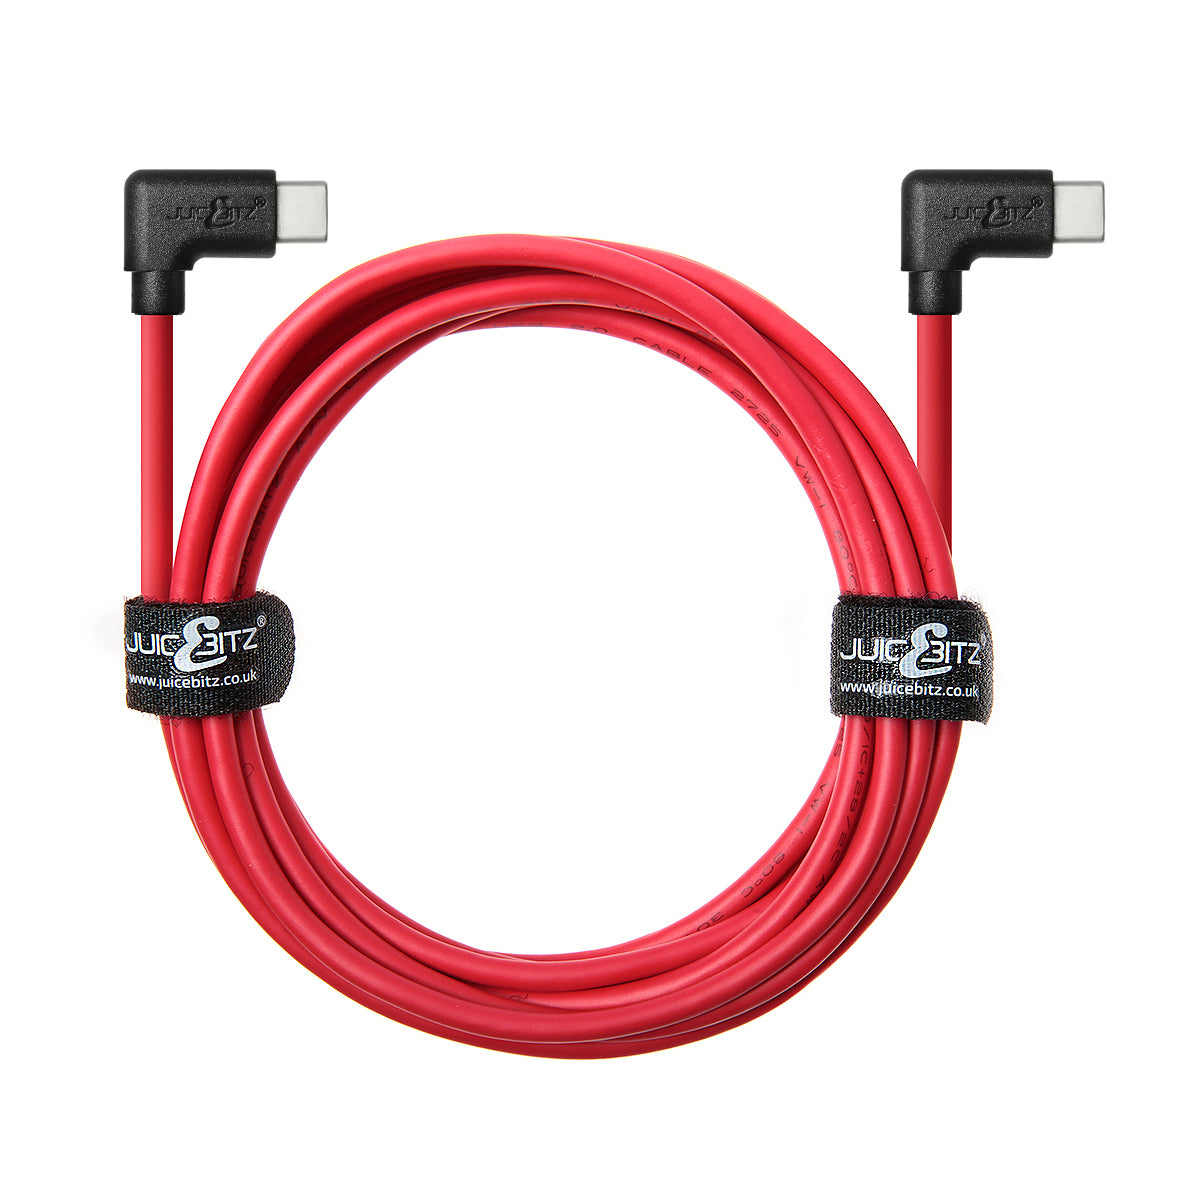 USB-C to USB-C Angled 3A Charger Cable USB 2.0 Data Transfer Lead - Red